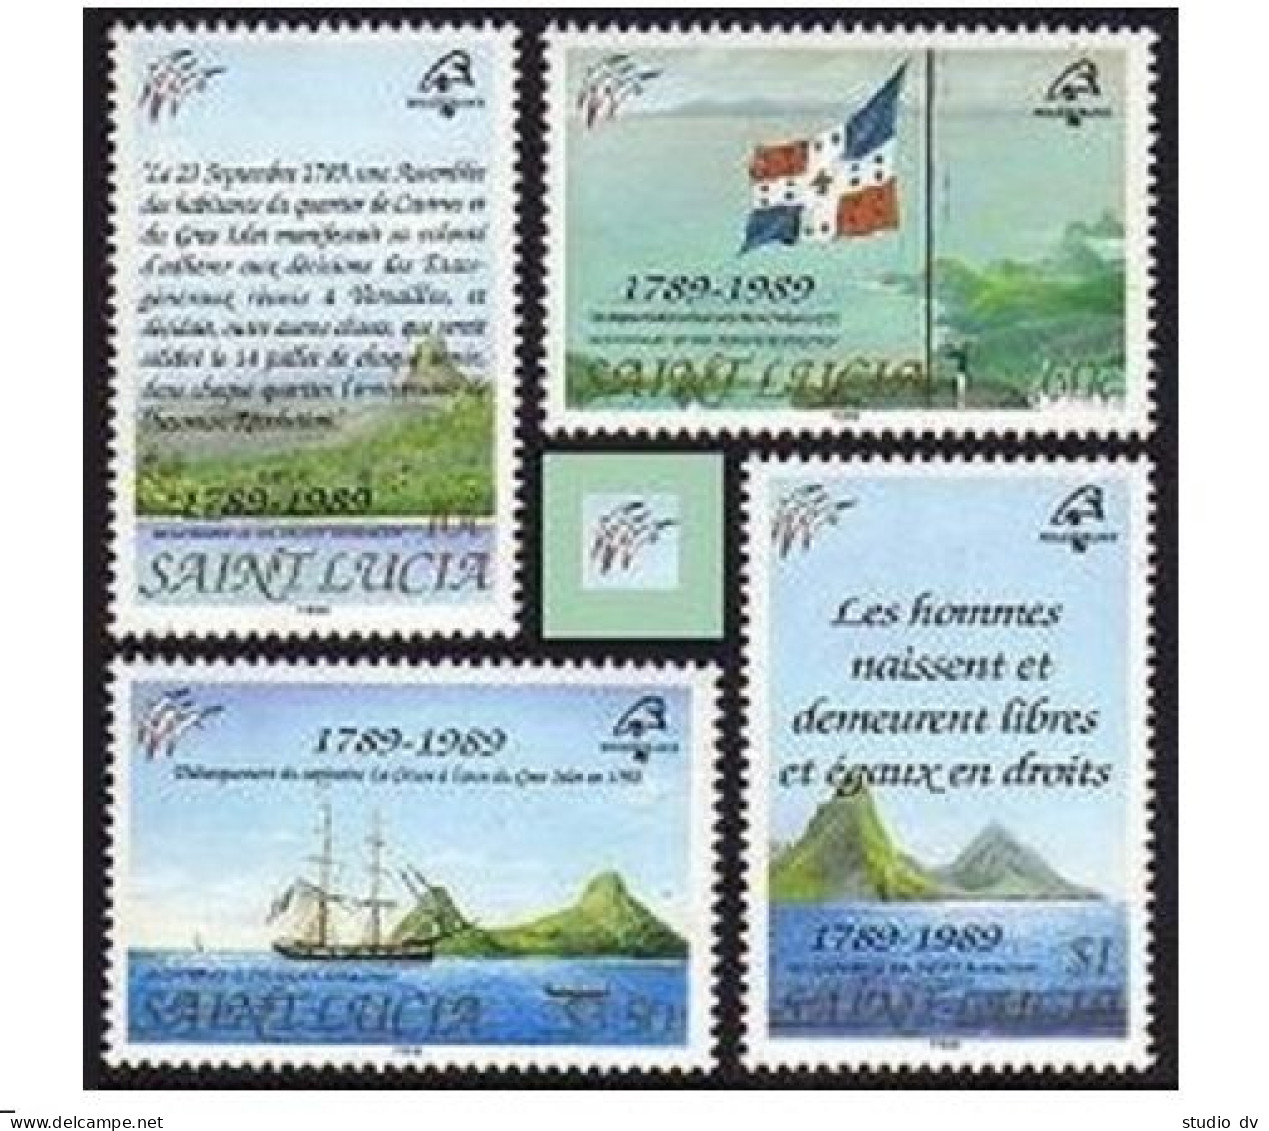 St.Lucia 942-945, MNH. Michel 952-955. PHILEXFRANCE-1989. Ship, Flags. - St.Lucia (1979-...)